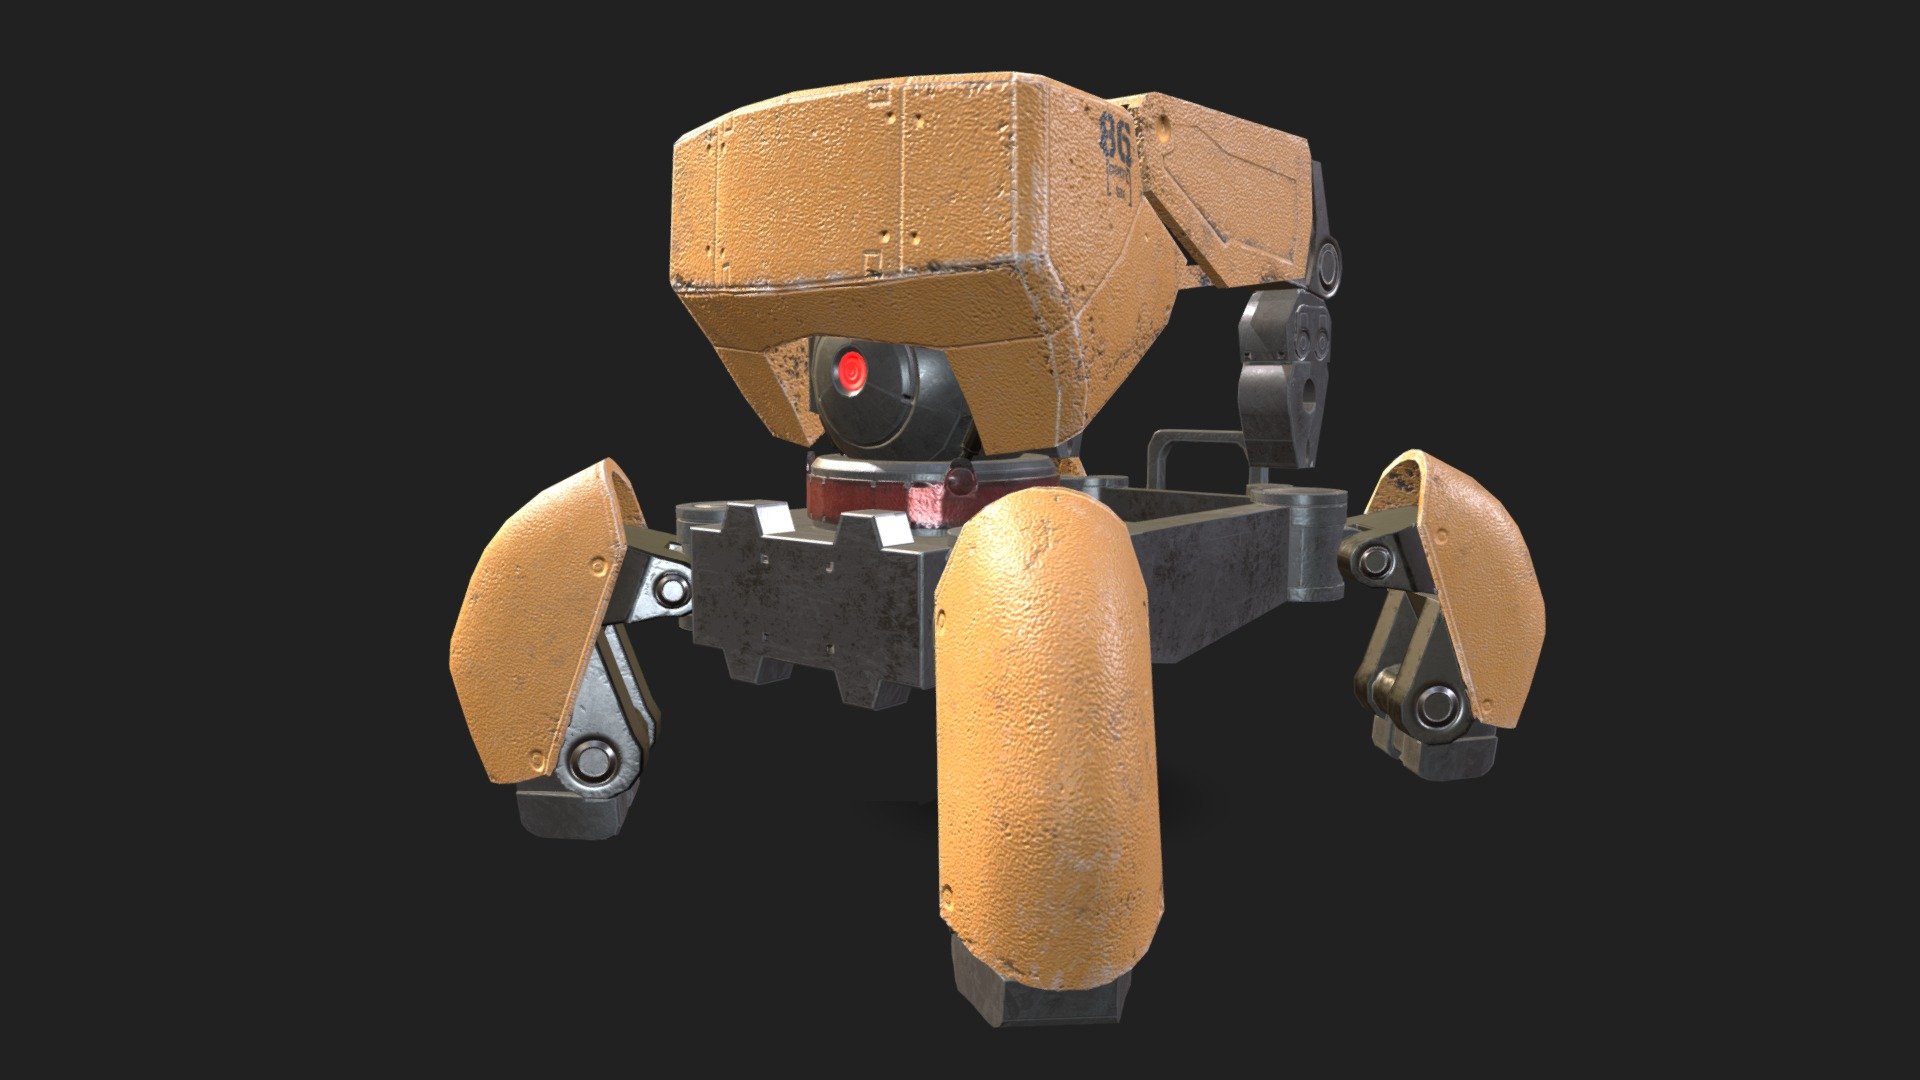 A small mech from the anime called 86 eighty-six. Fido is a Scavenger which providing aid to the team by resupplying ammunition and recharging energy packs, as well as finding and extracting materials from abandoned or destroyed units. Done in Maya and Substance painter 3d model